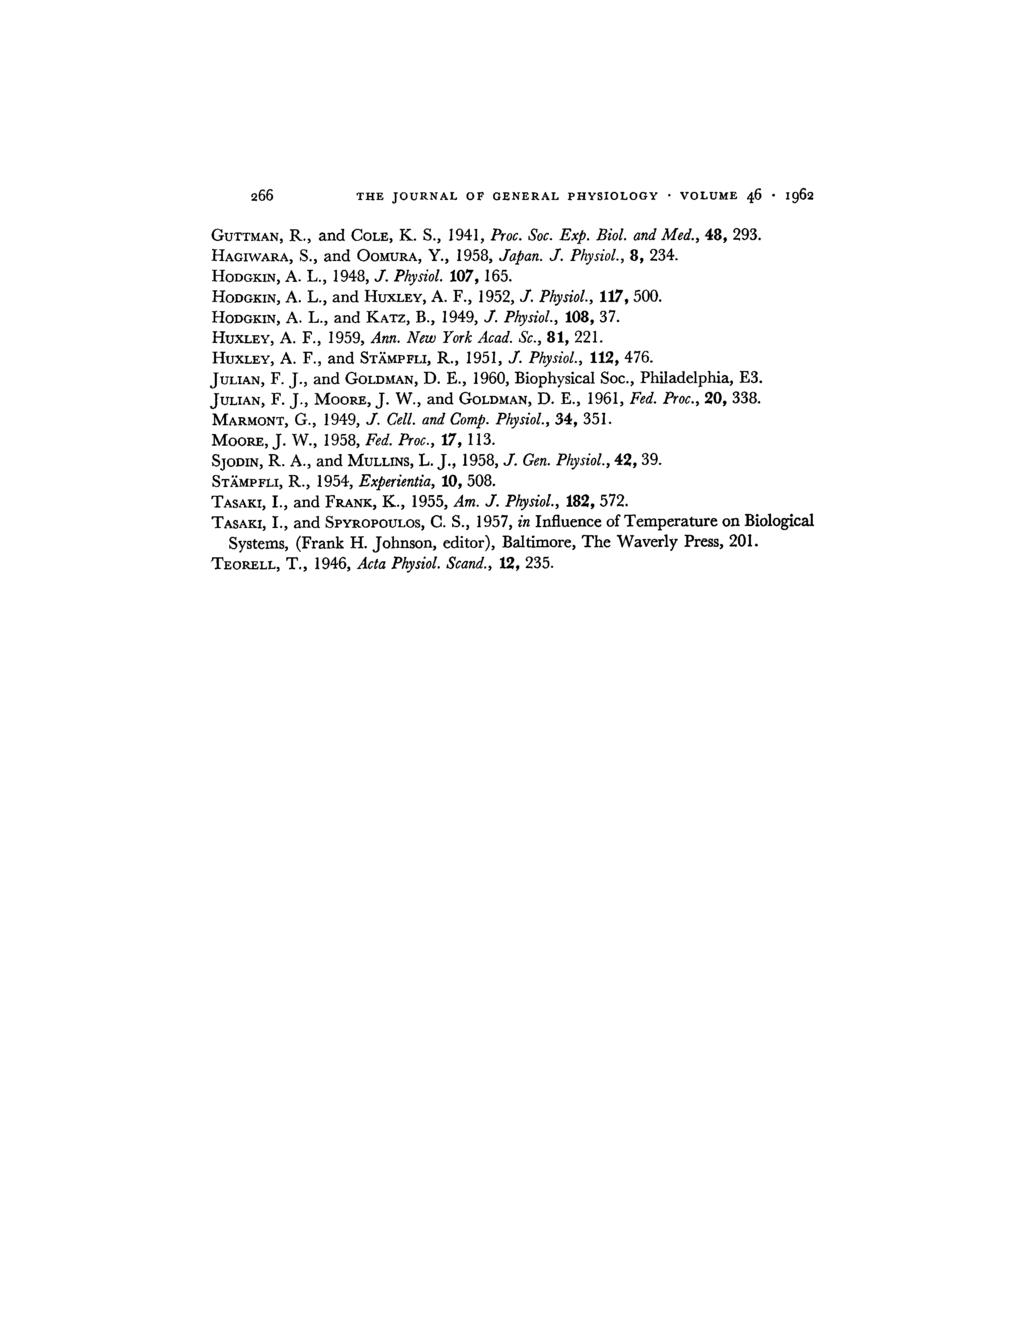 266 THE JOURNAL OF GENERAL PHYSIOLOGY VOLUME 46,962 GUTTMAN, R., and COLE, K. S., 1941, Proc. Soc. Exp. Biol. and Med., 48, 293. HACIWARA, S., and OOMVRA, Y., 1958, Japan. J. Physiol., 8, 234.